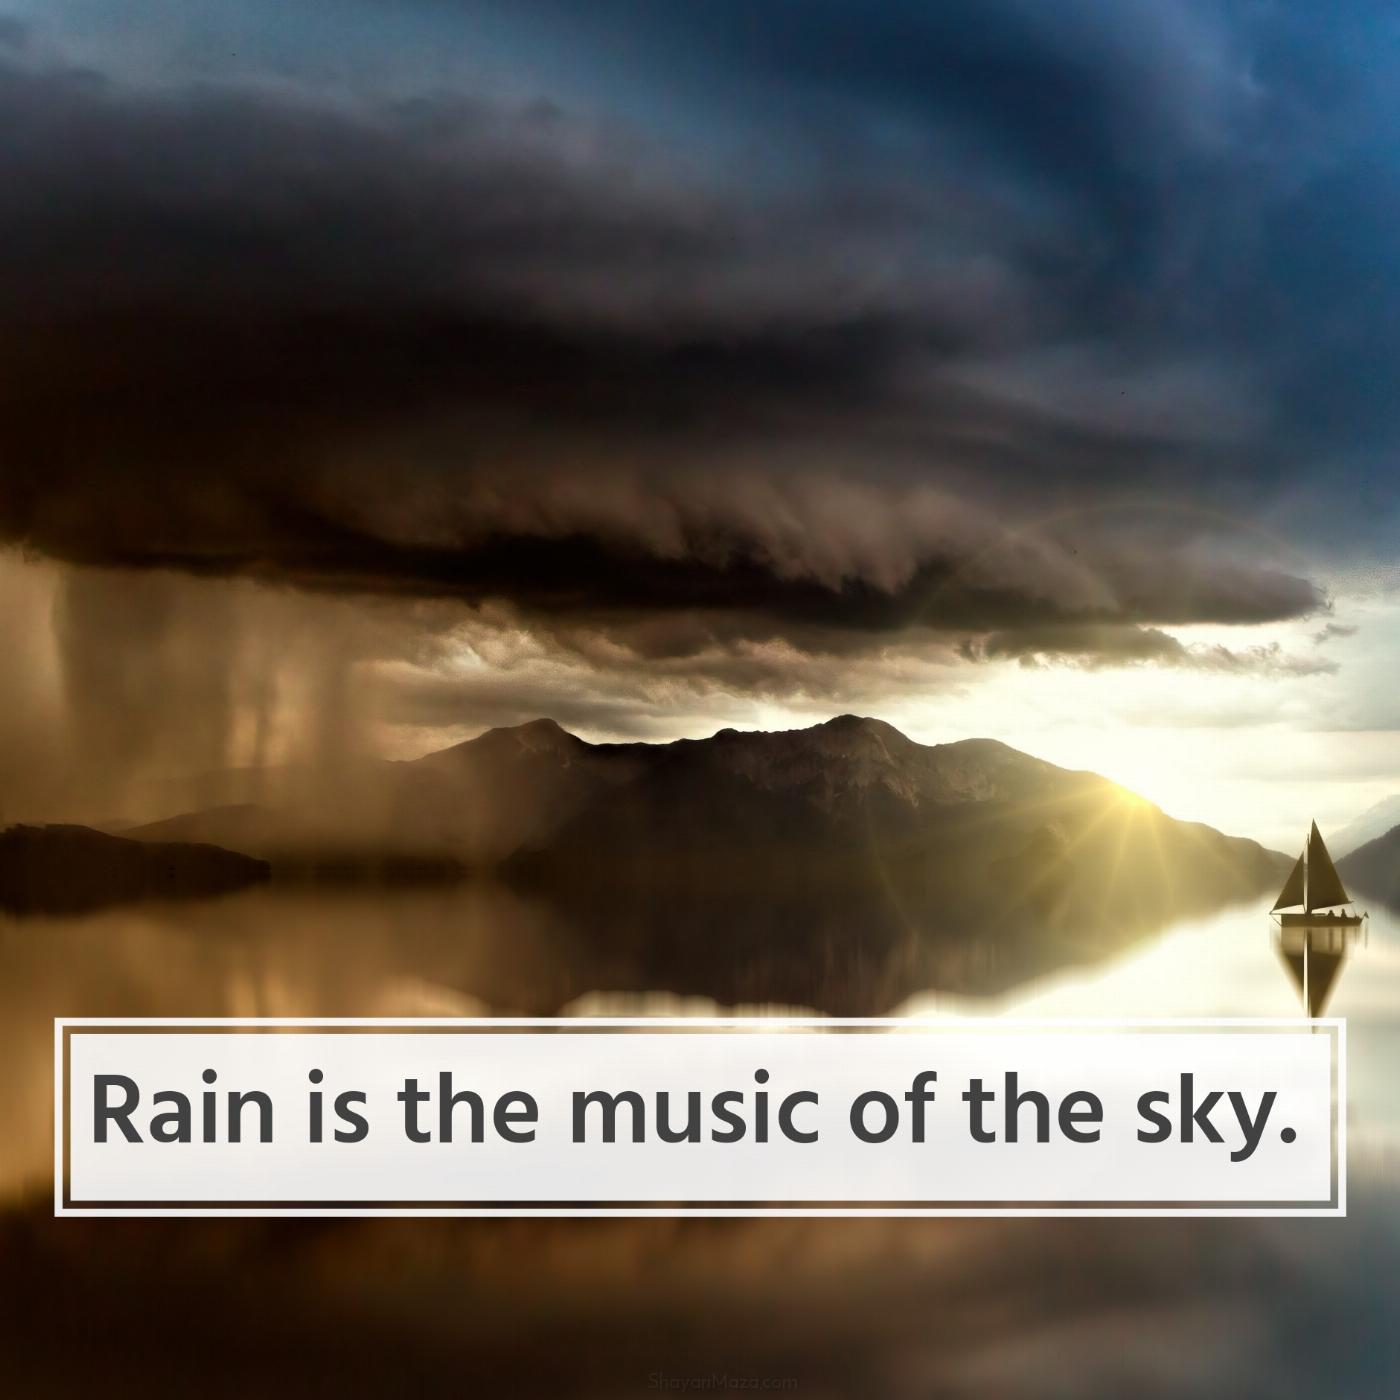 Rain is the music of the sky